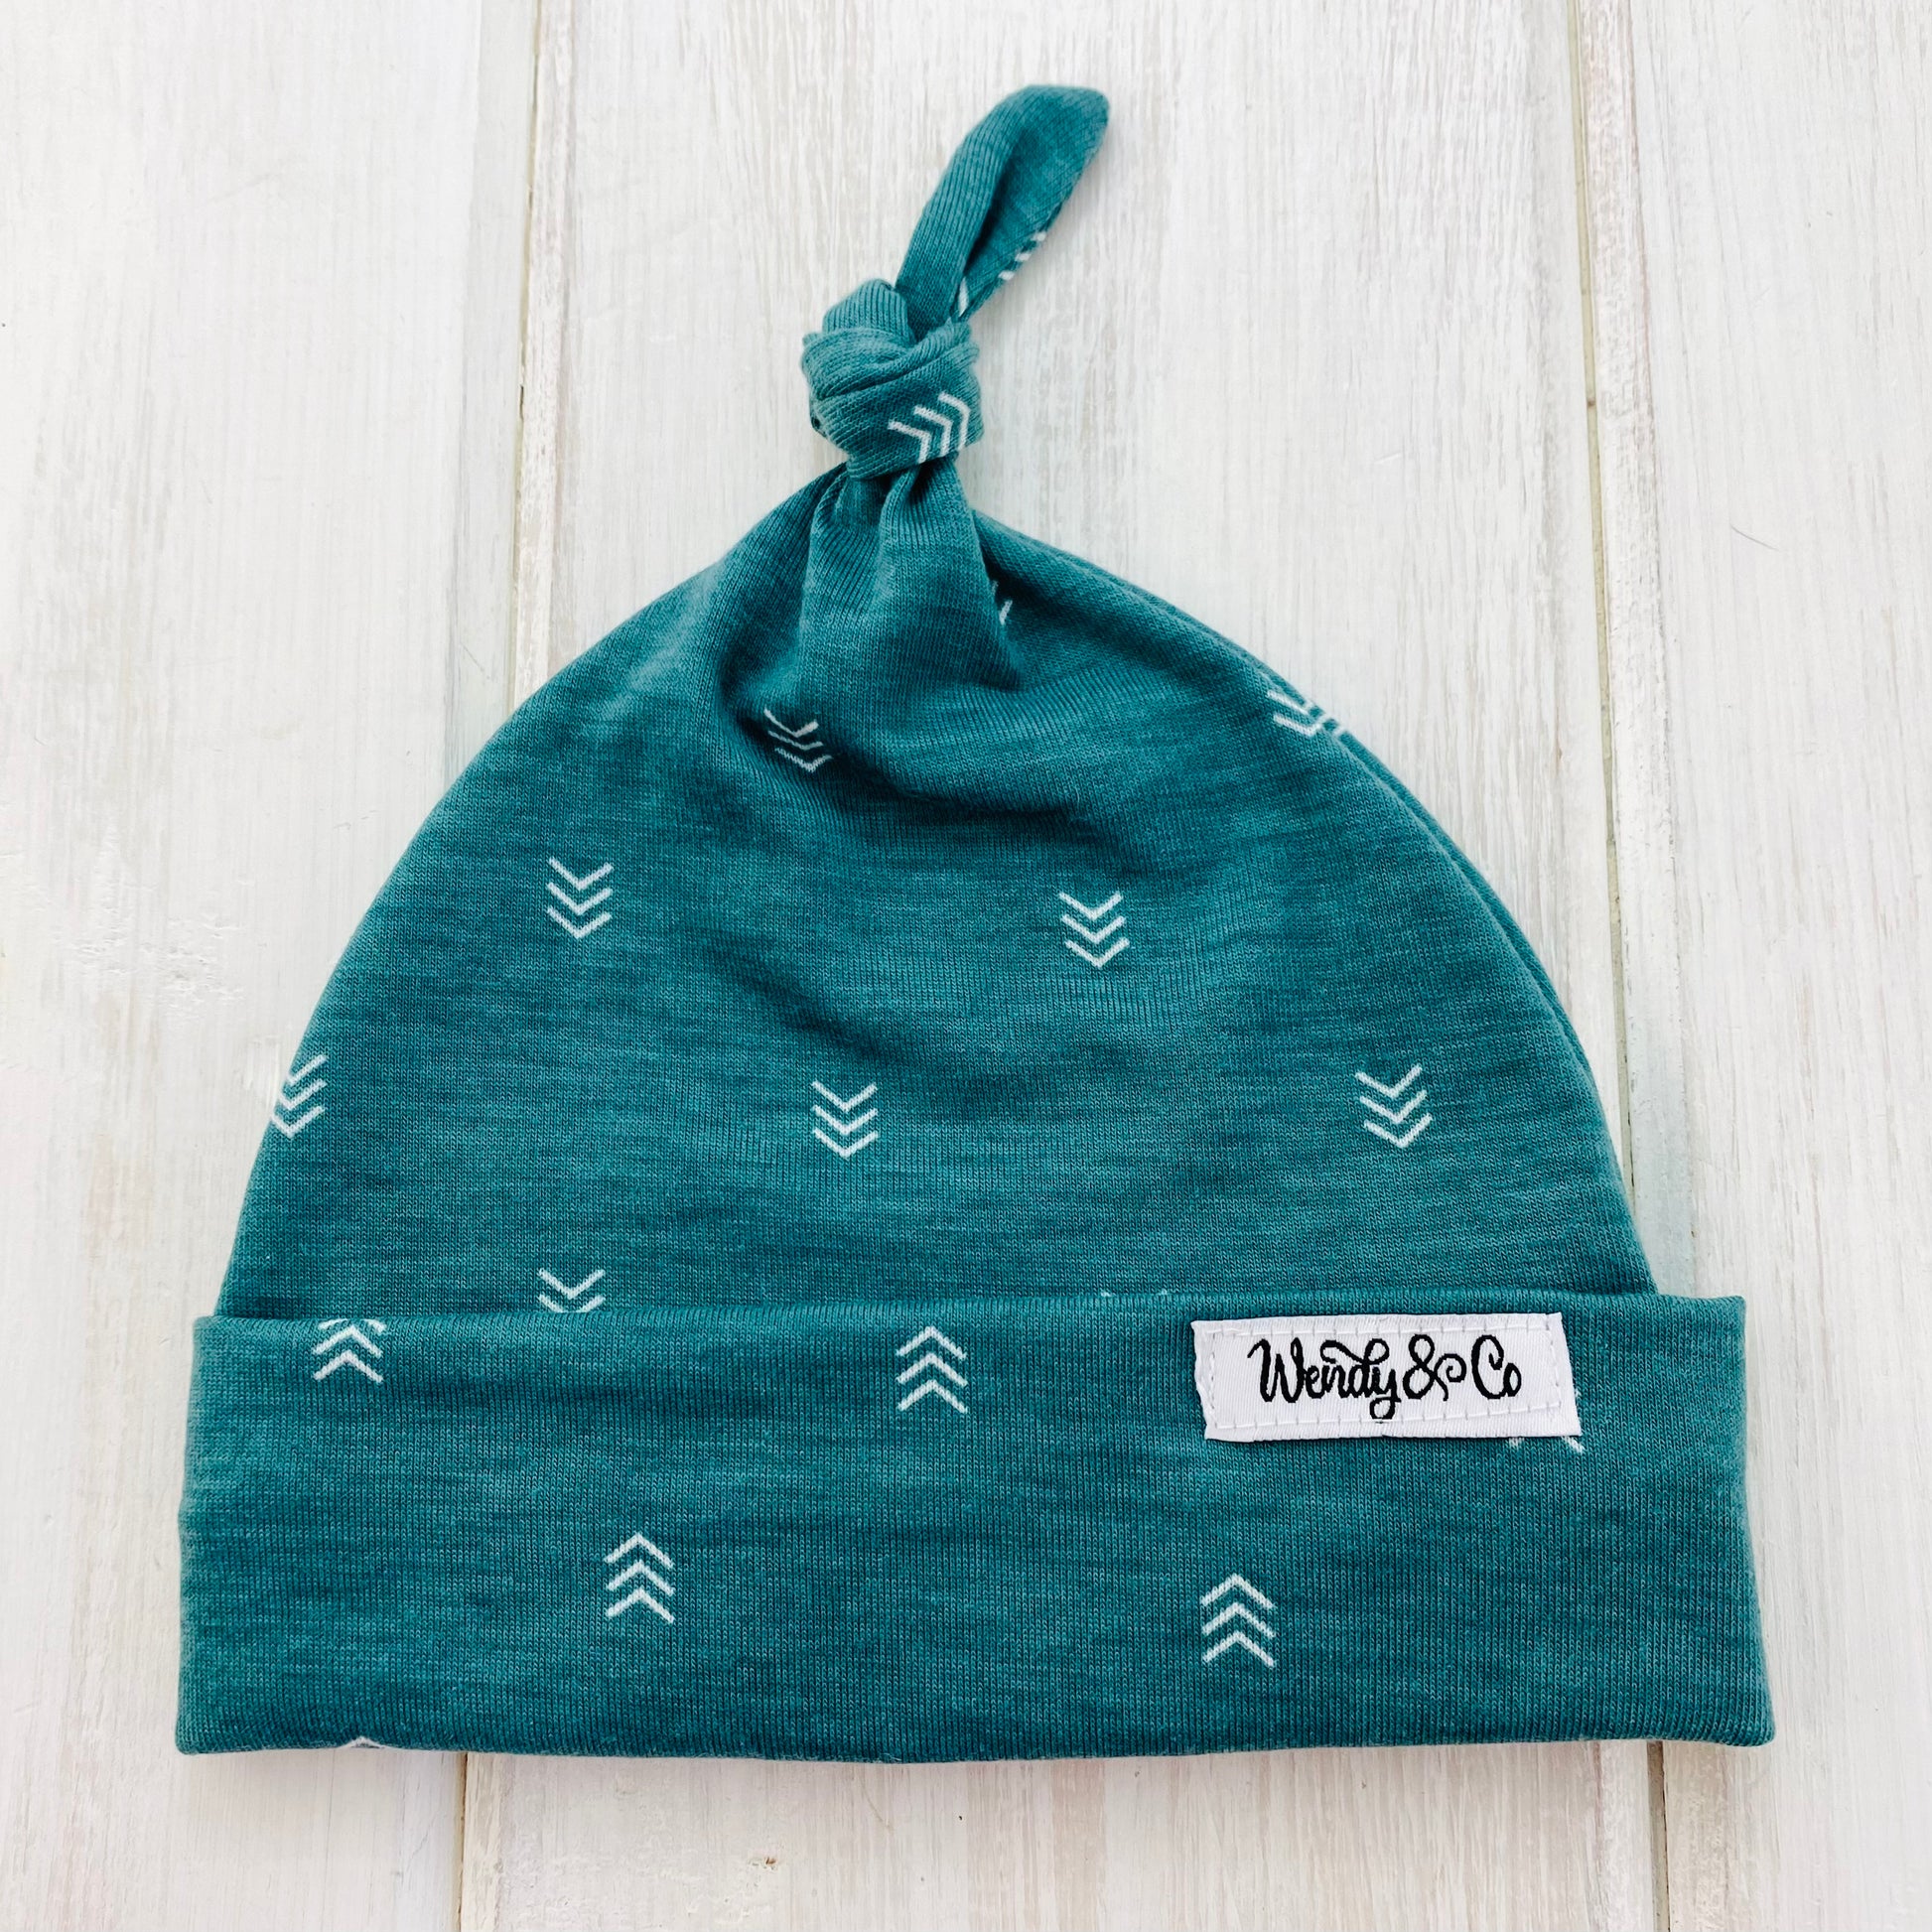 Soft newborn hat in green with arrows.